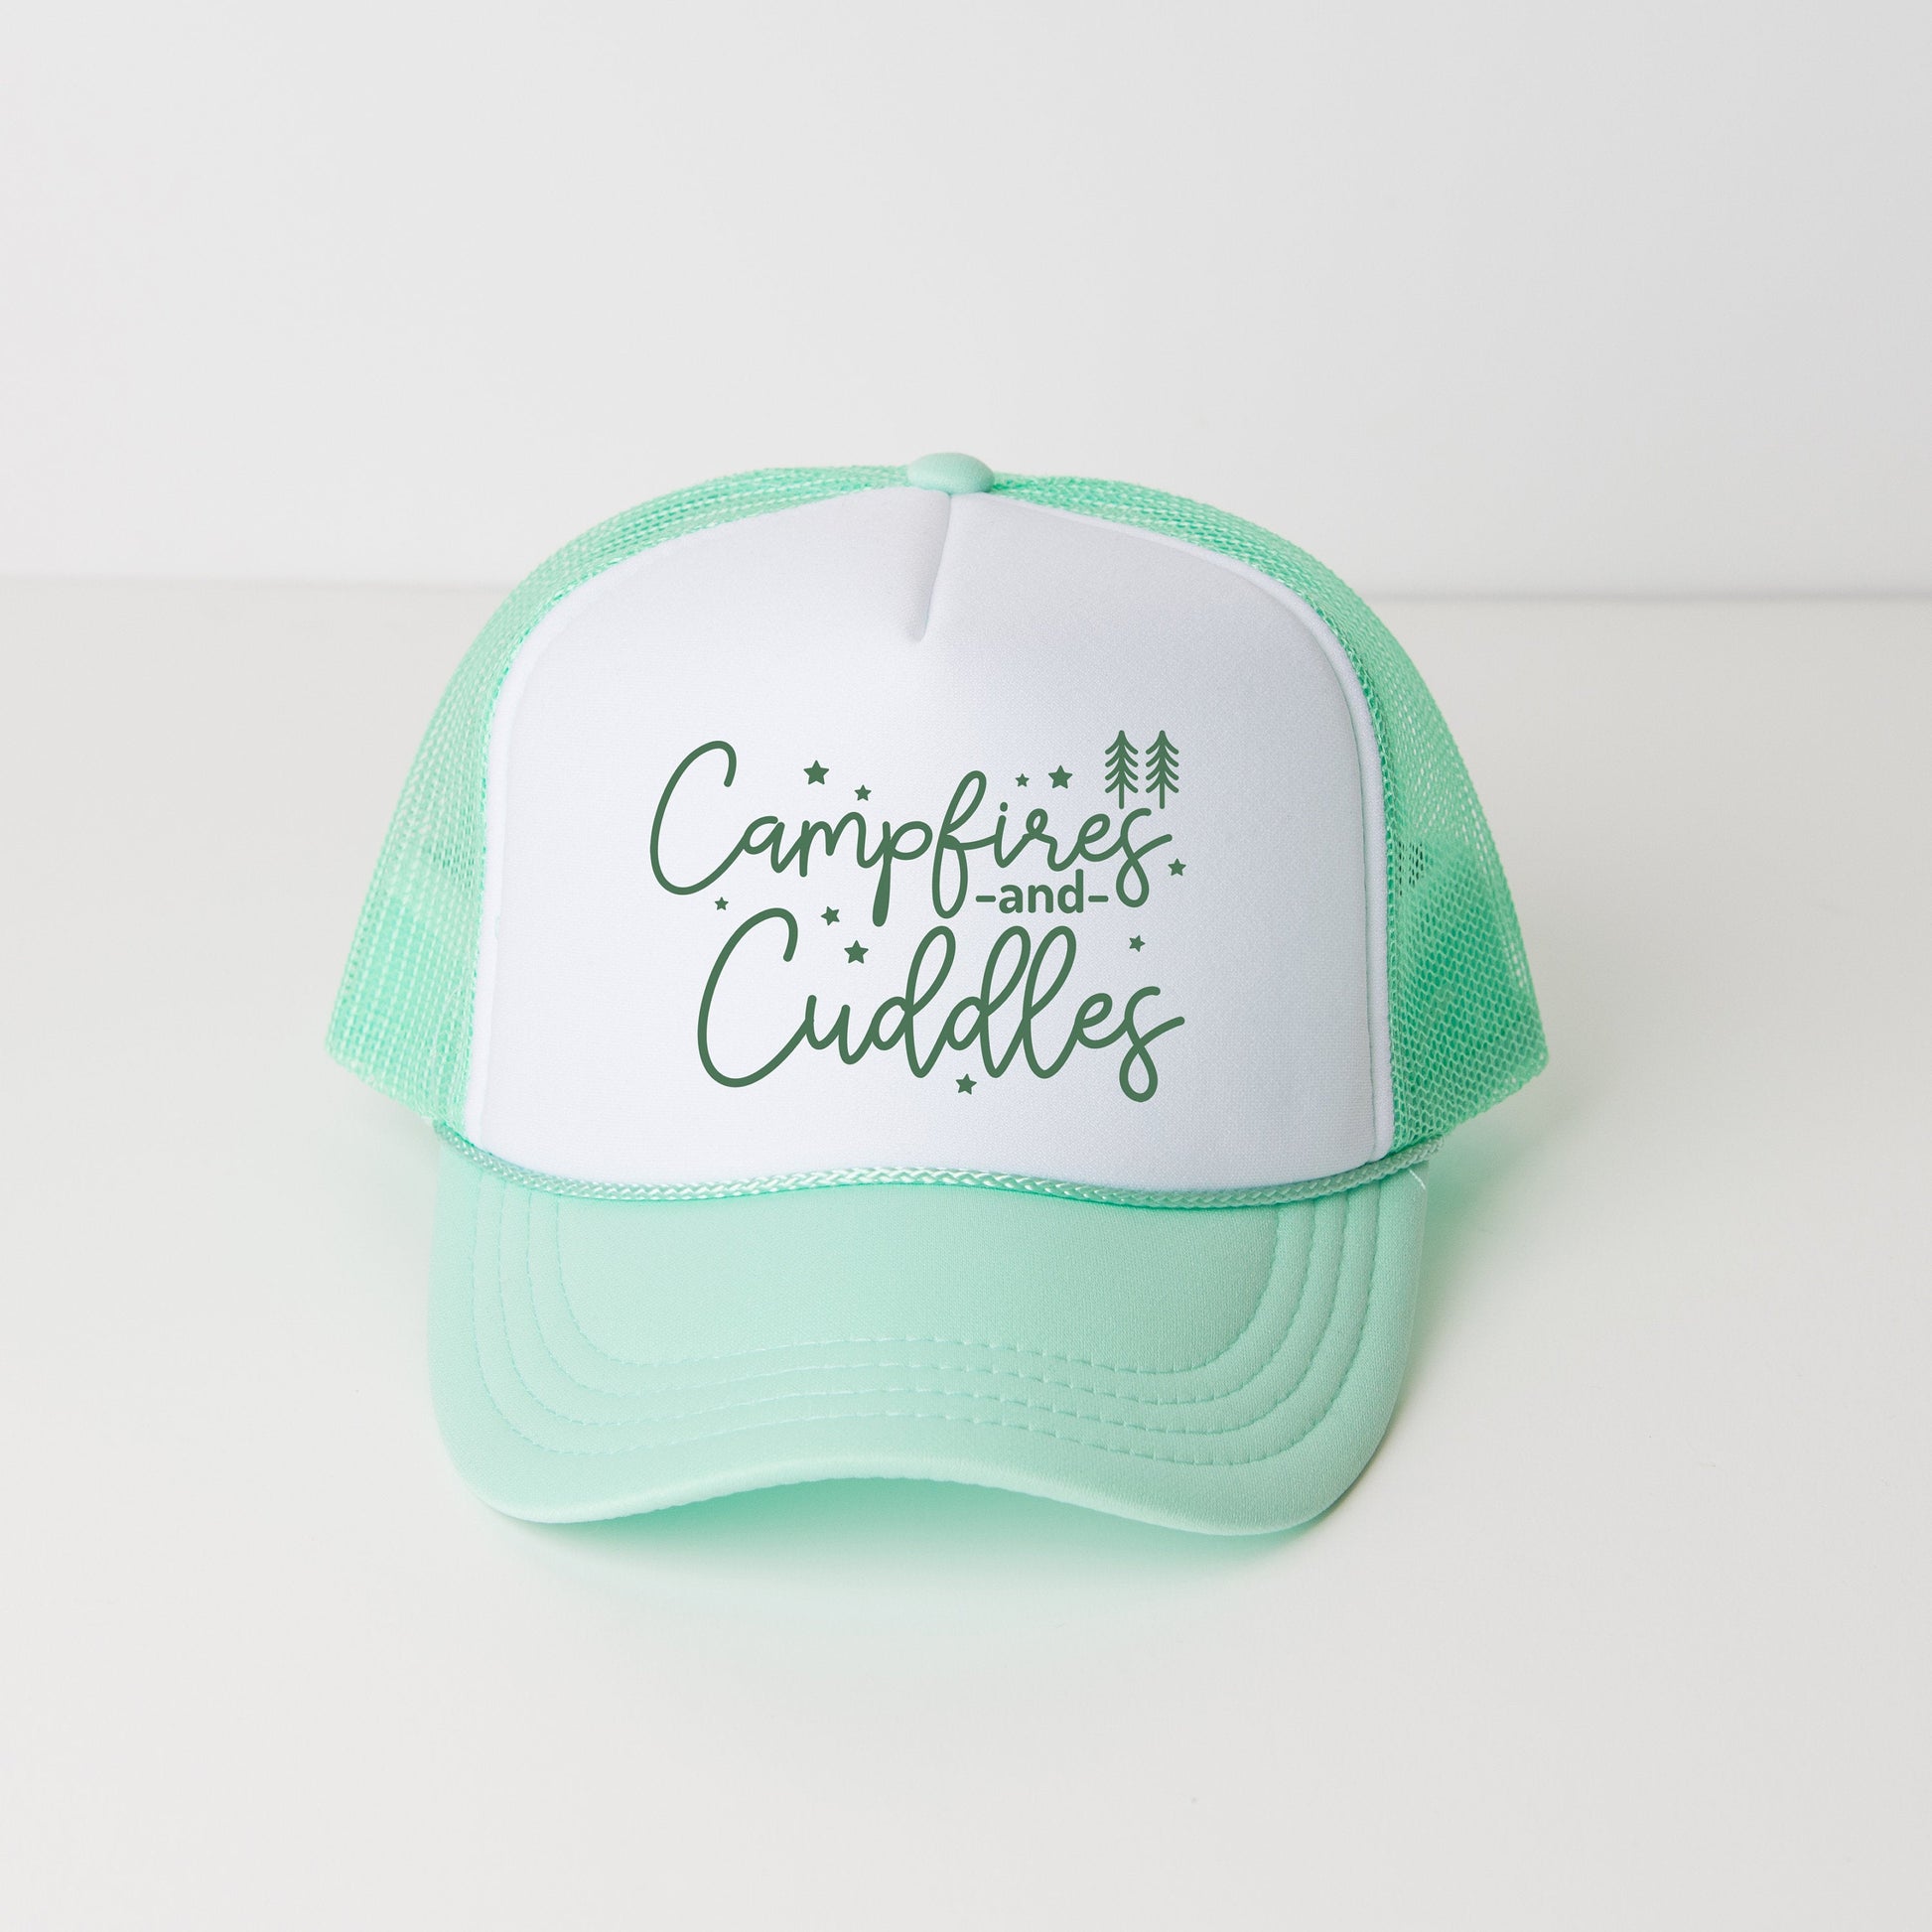 a green and white trucker hat that says campfires and cuddles